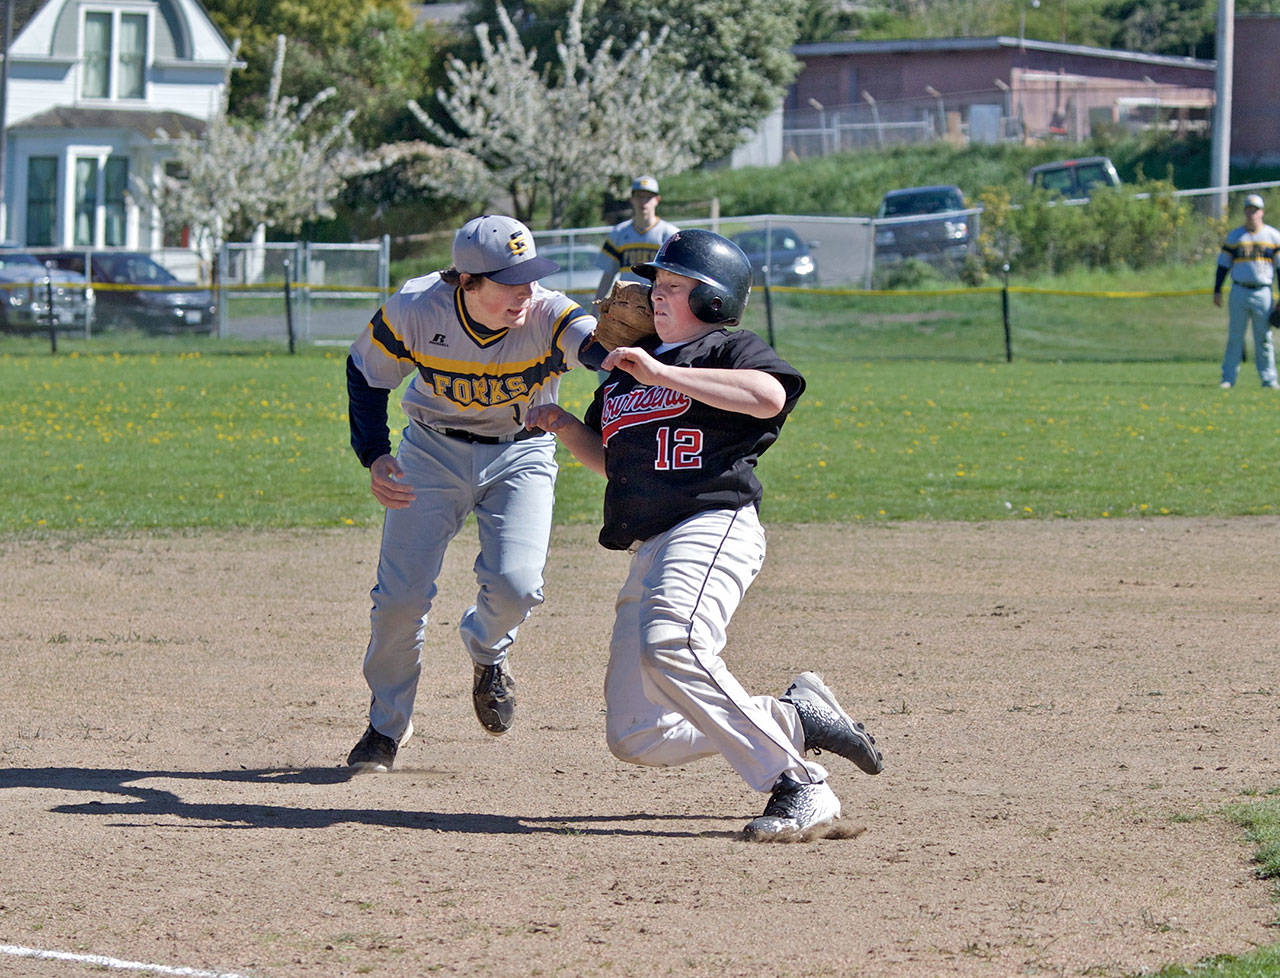 Steve Mullensky/for Peninsula Daily News                                Port Townsend’s Travis McComaghy takes it on the chin as he’s tagged out by Forks’ third baseman, Billy Palmer, during a game in Port Townsend on Monday.